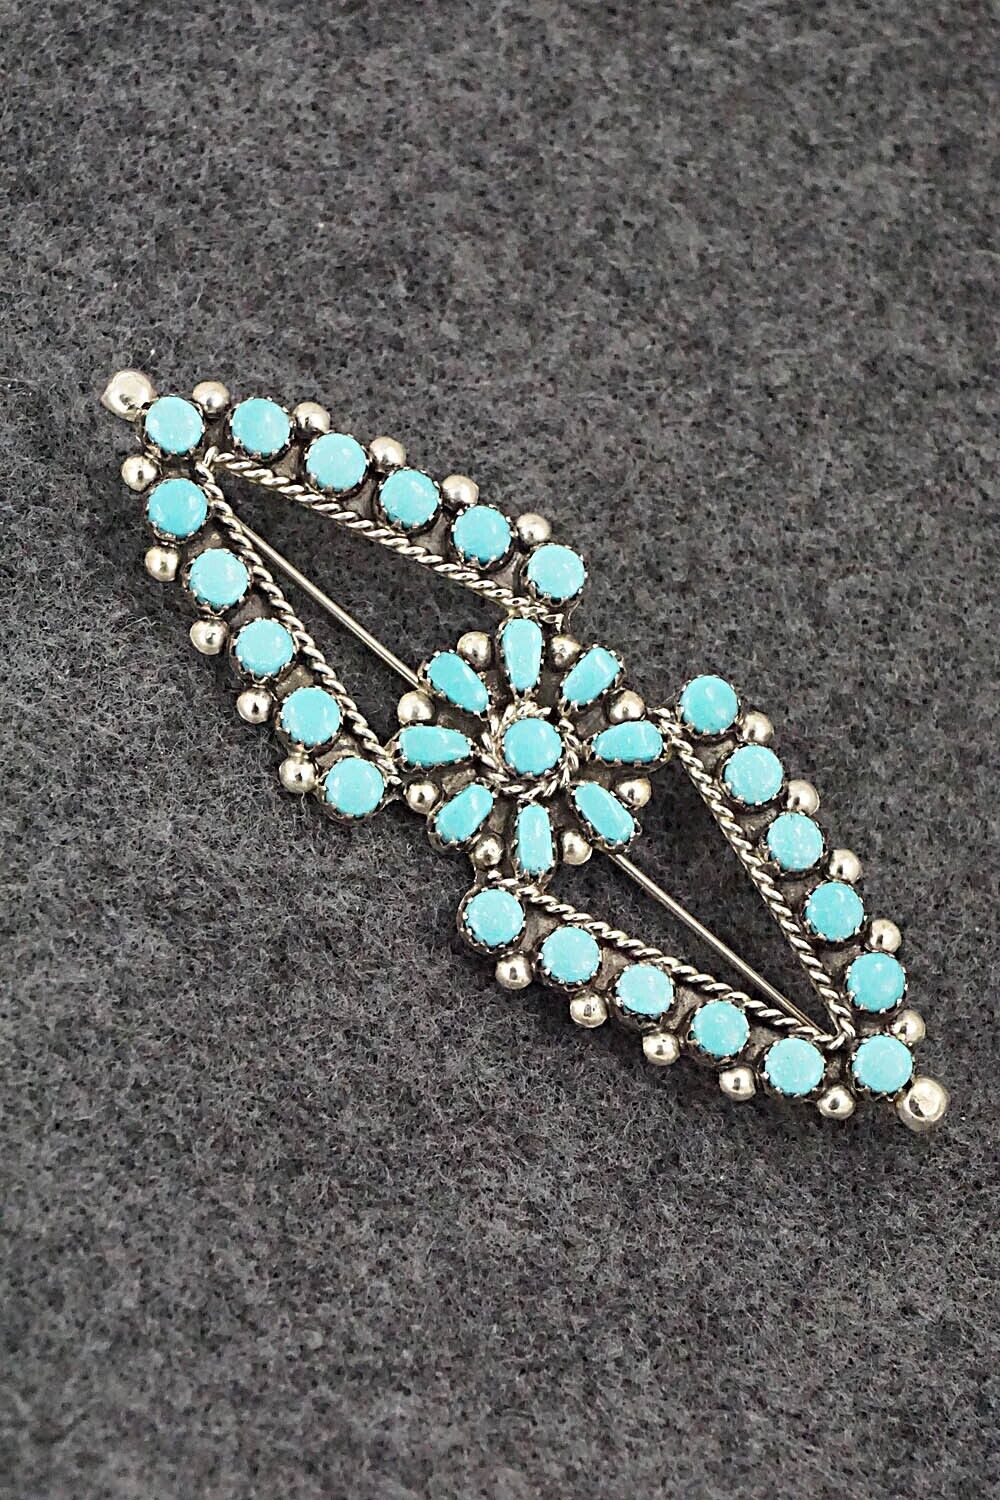 Turquoise & Sterling Silver Pin - E. Gchachu